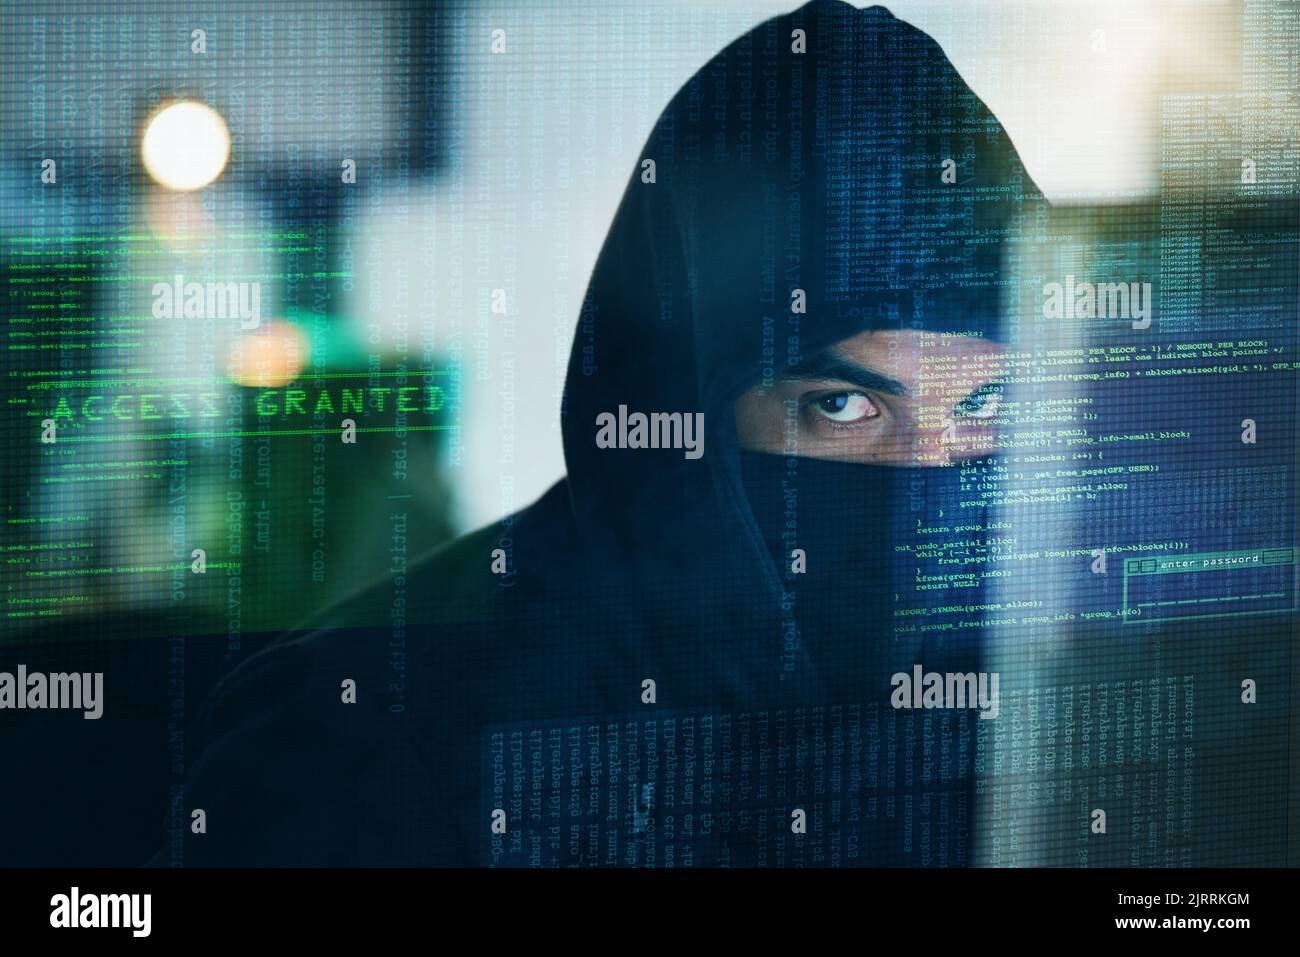 How will you keep him out of your data. Portrait of a serious computer hacker hacking into a computer in an office. Stock Photo